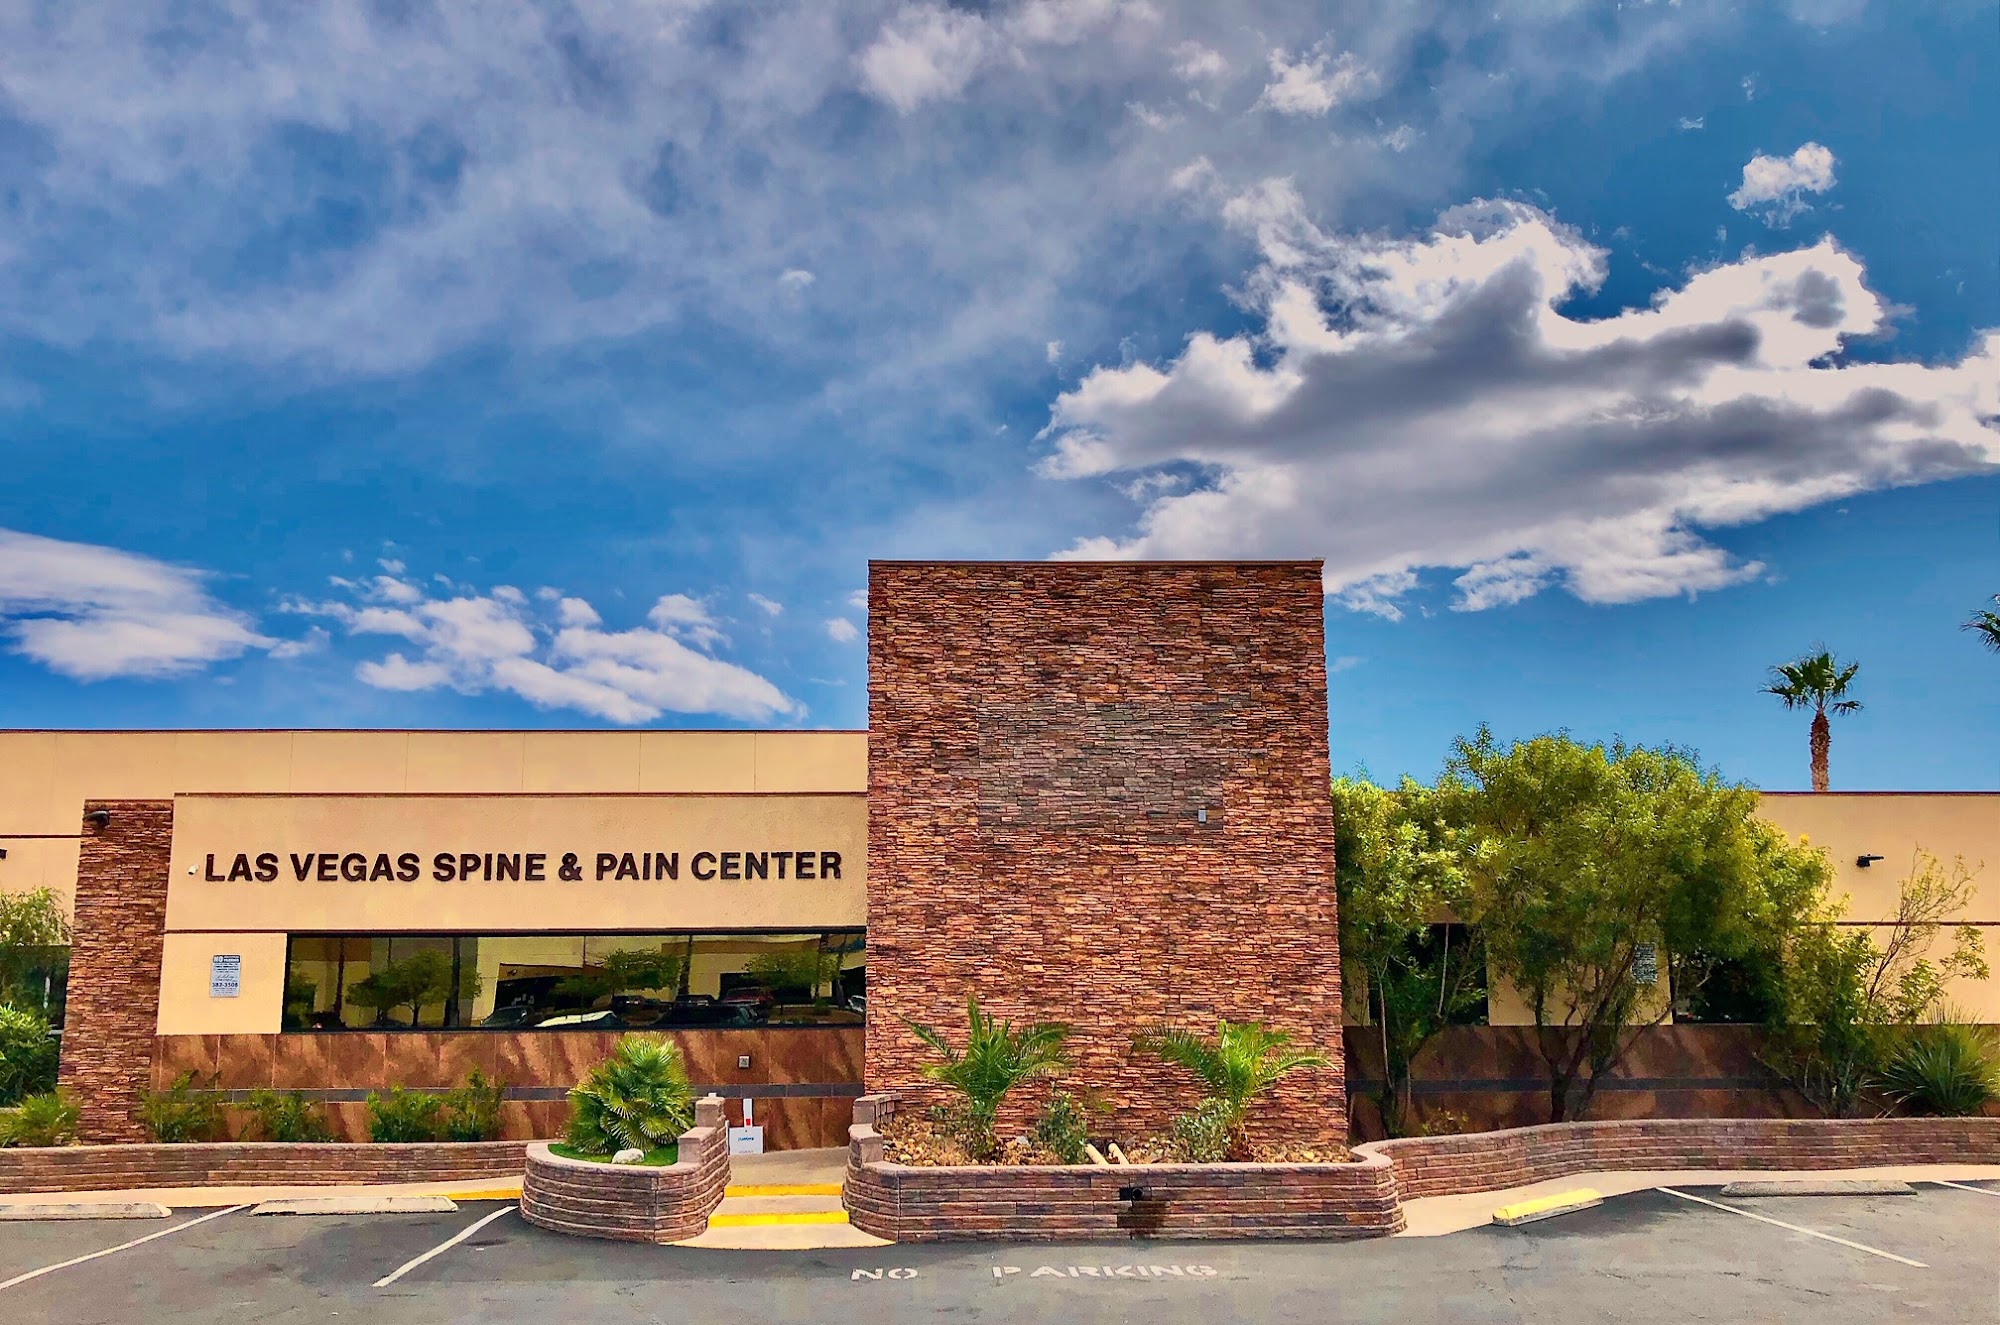 Las Vegas Spine and Pain Center